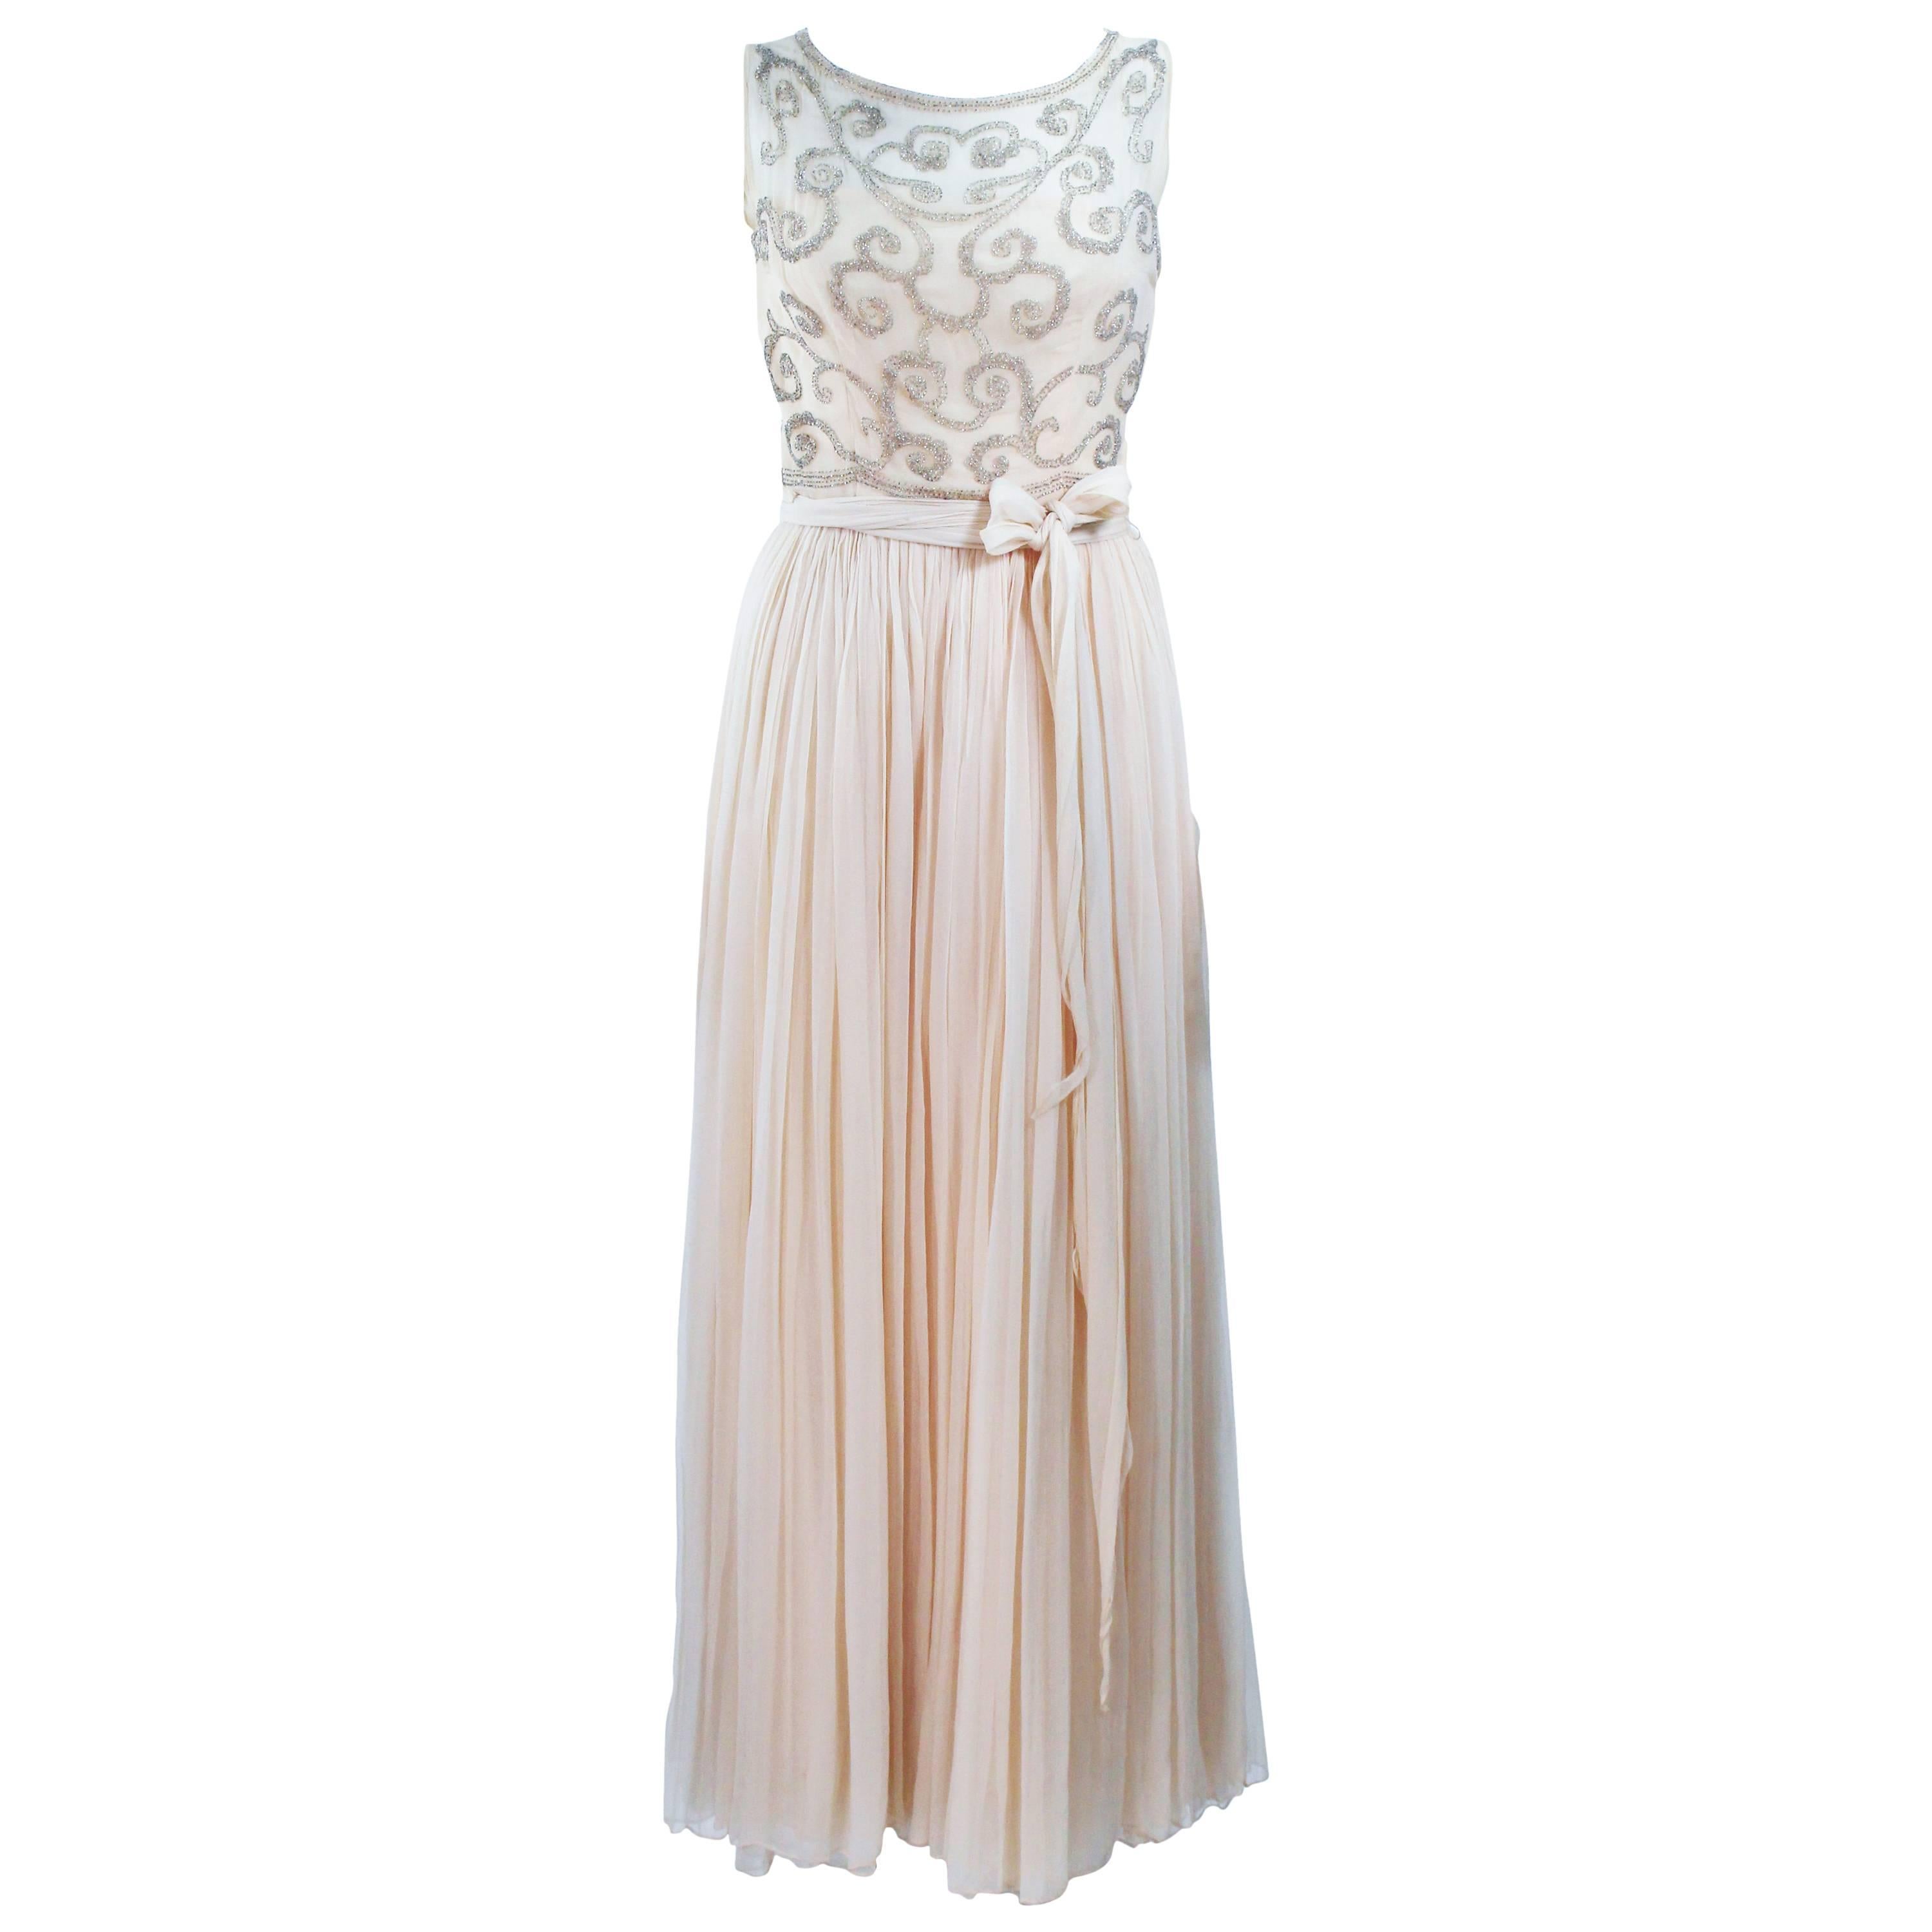 1960's Vintage Buttercream Chiffon Gown with Embellished Bodice Size 2 ...